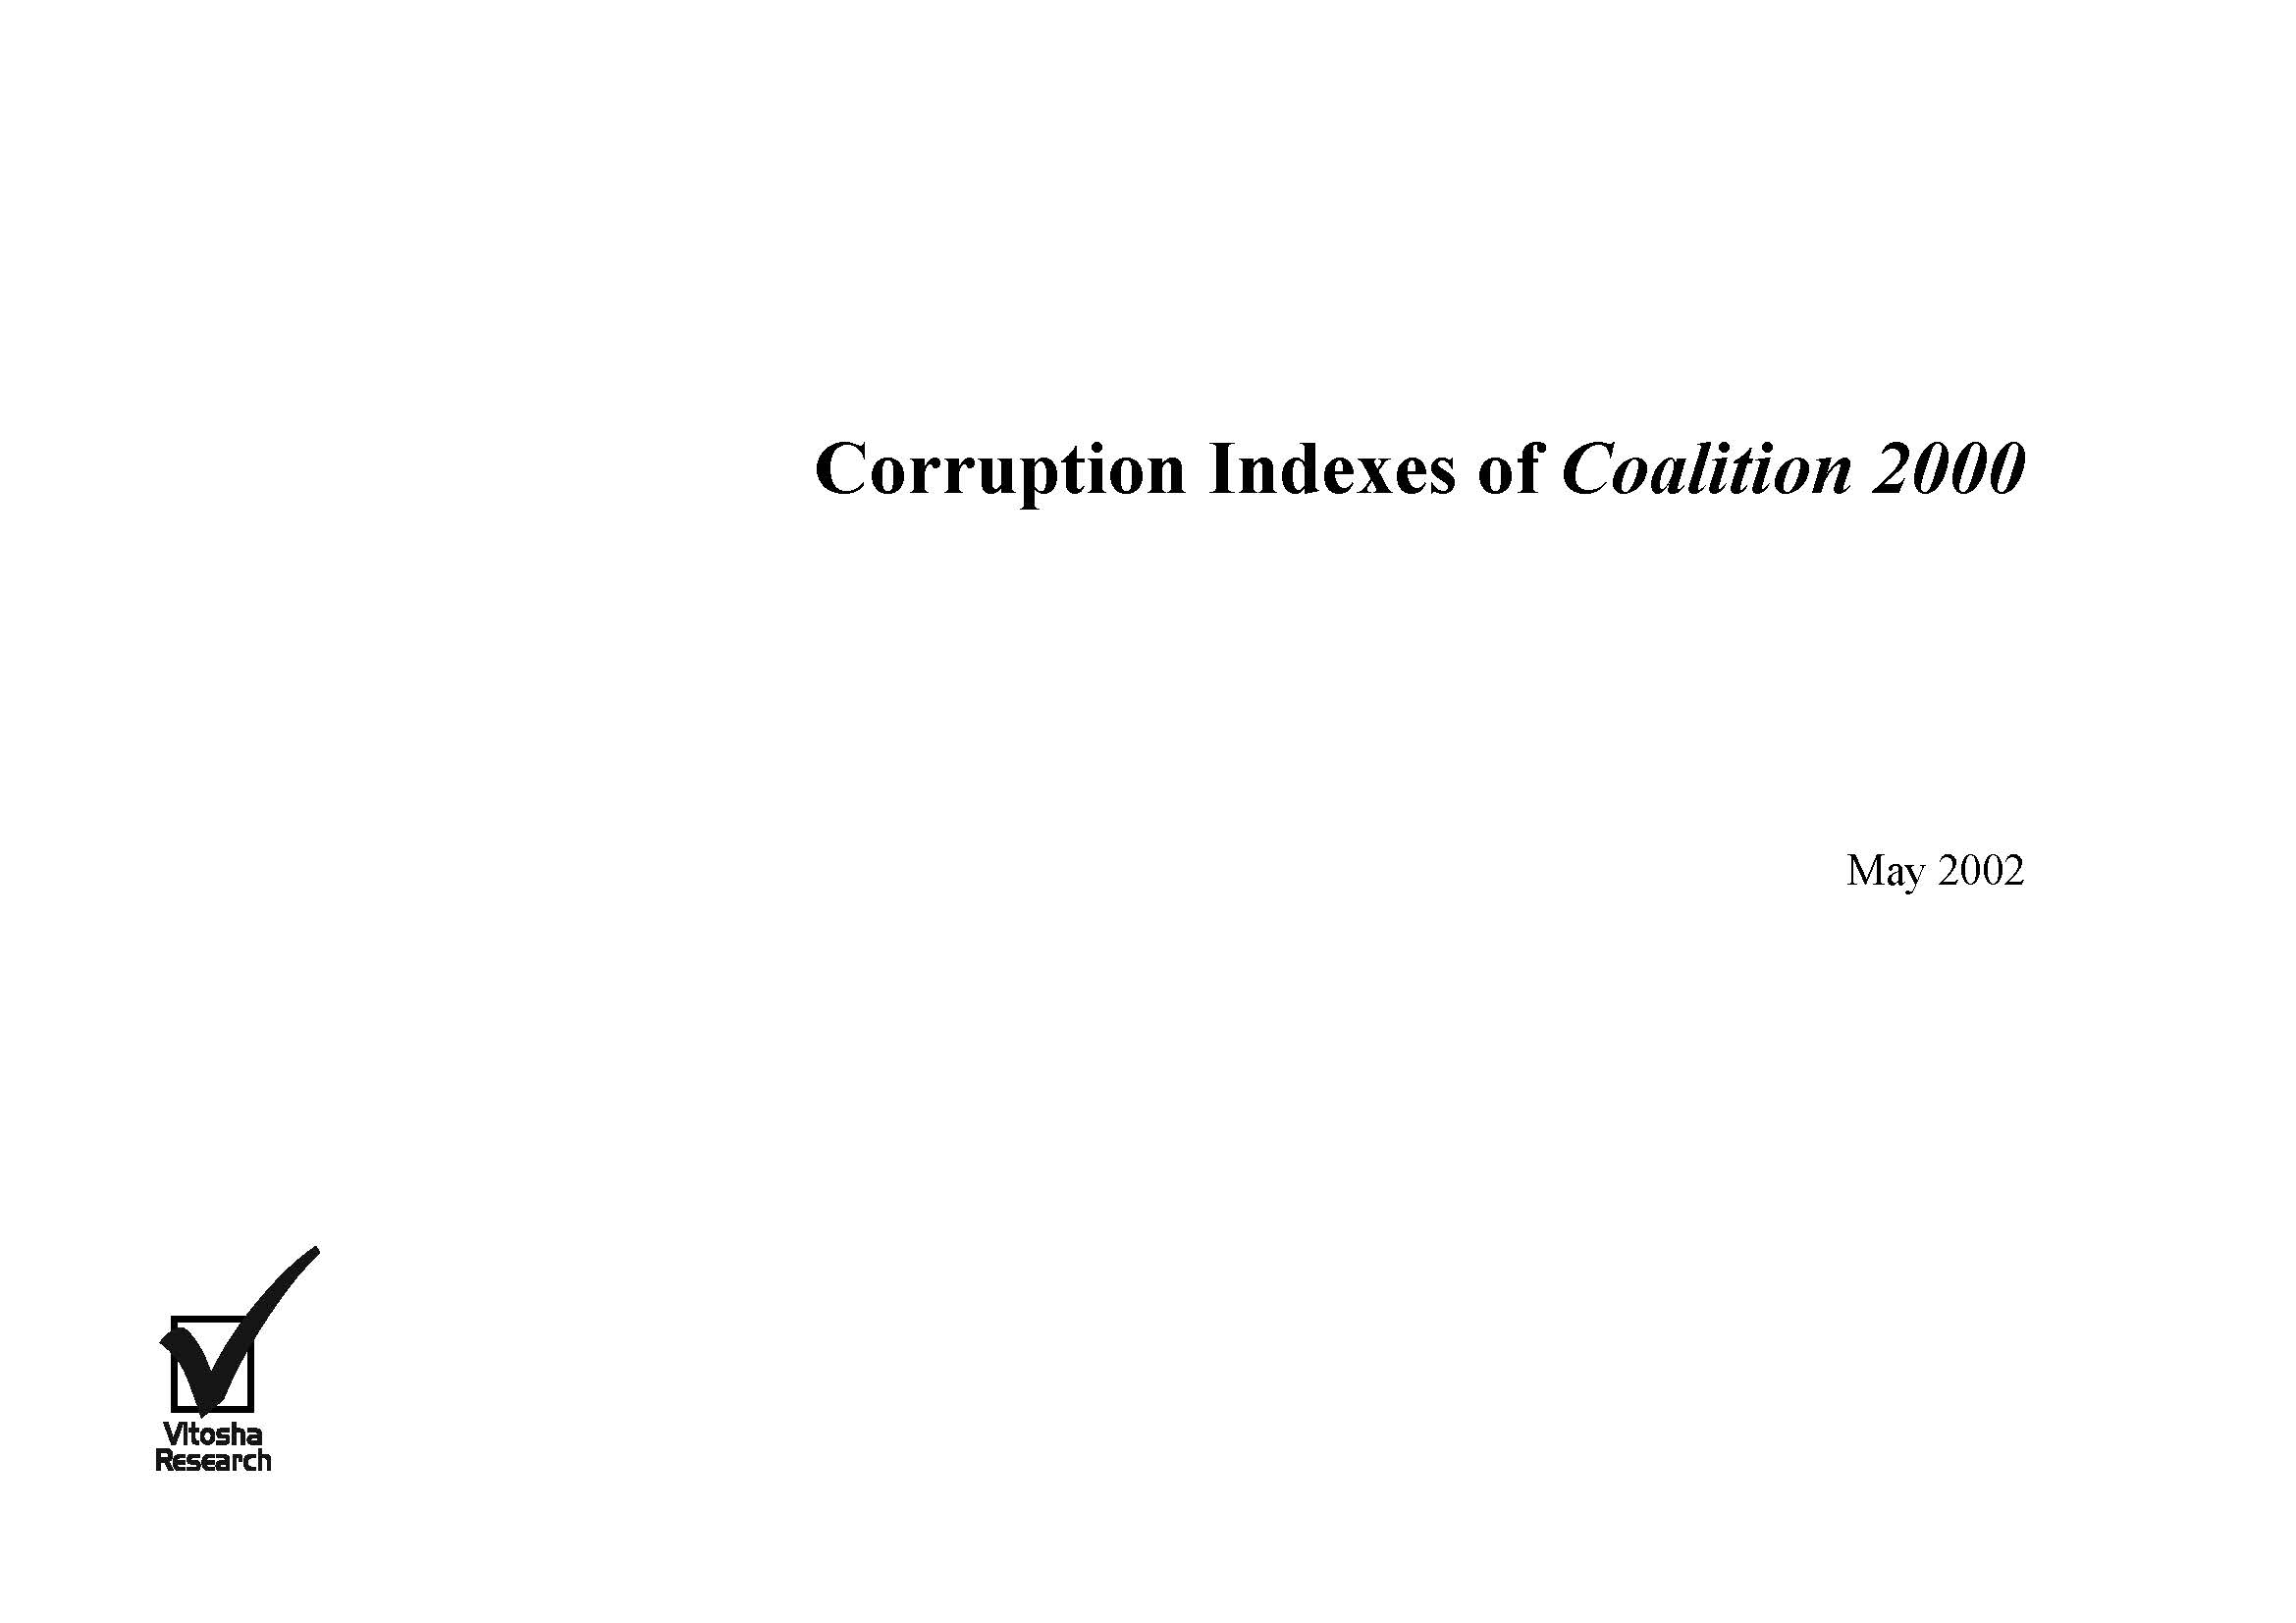 Corruption Indexes of Coalition 2000, May 2002